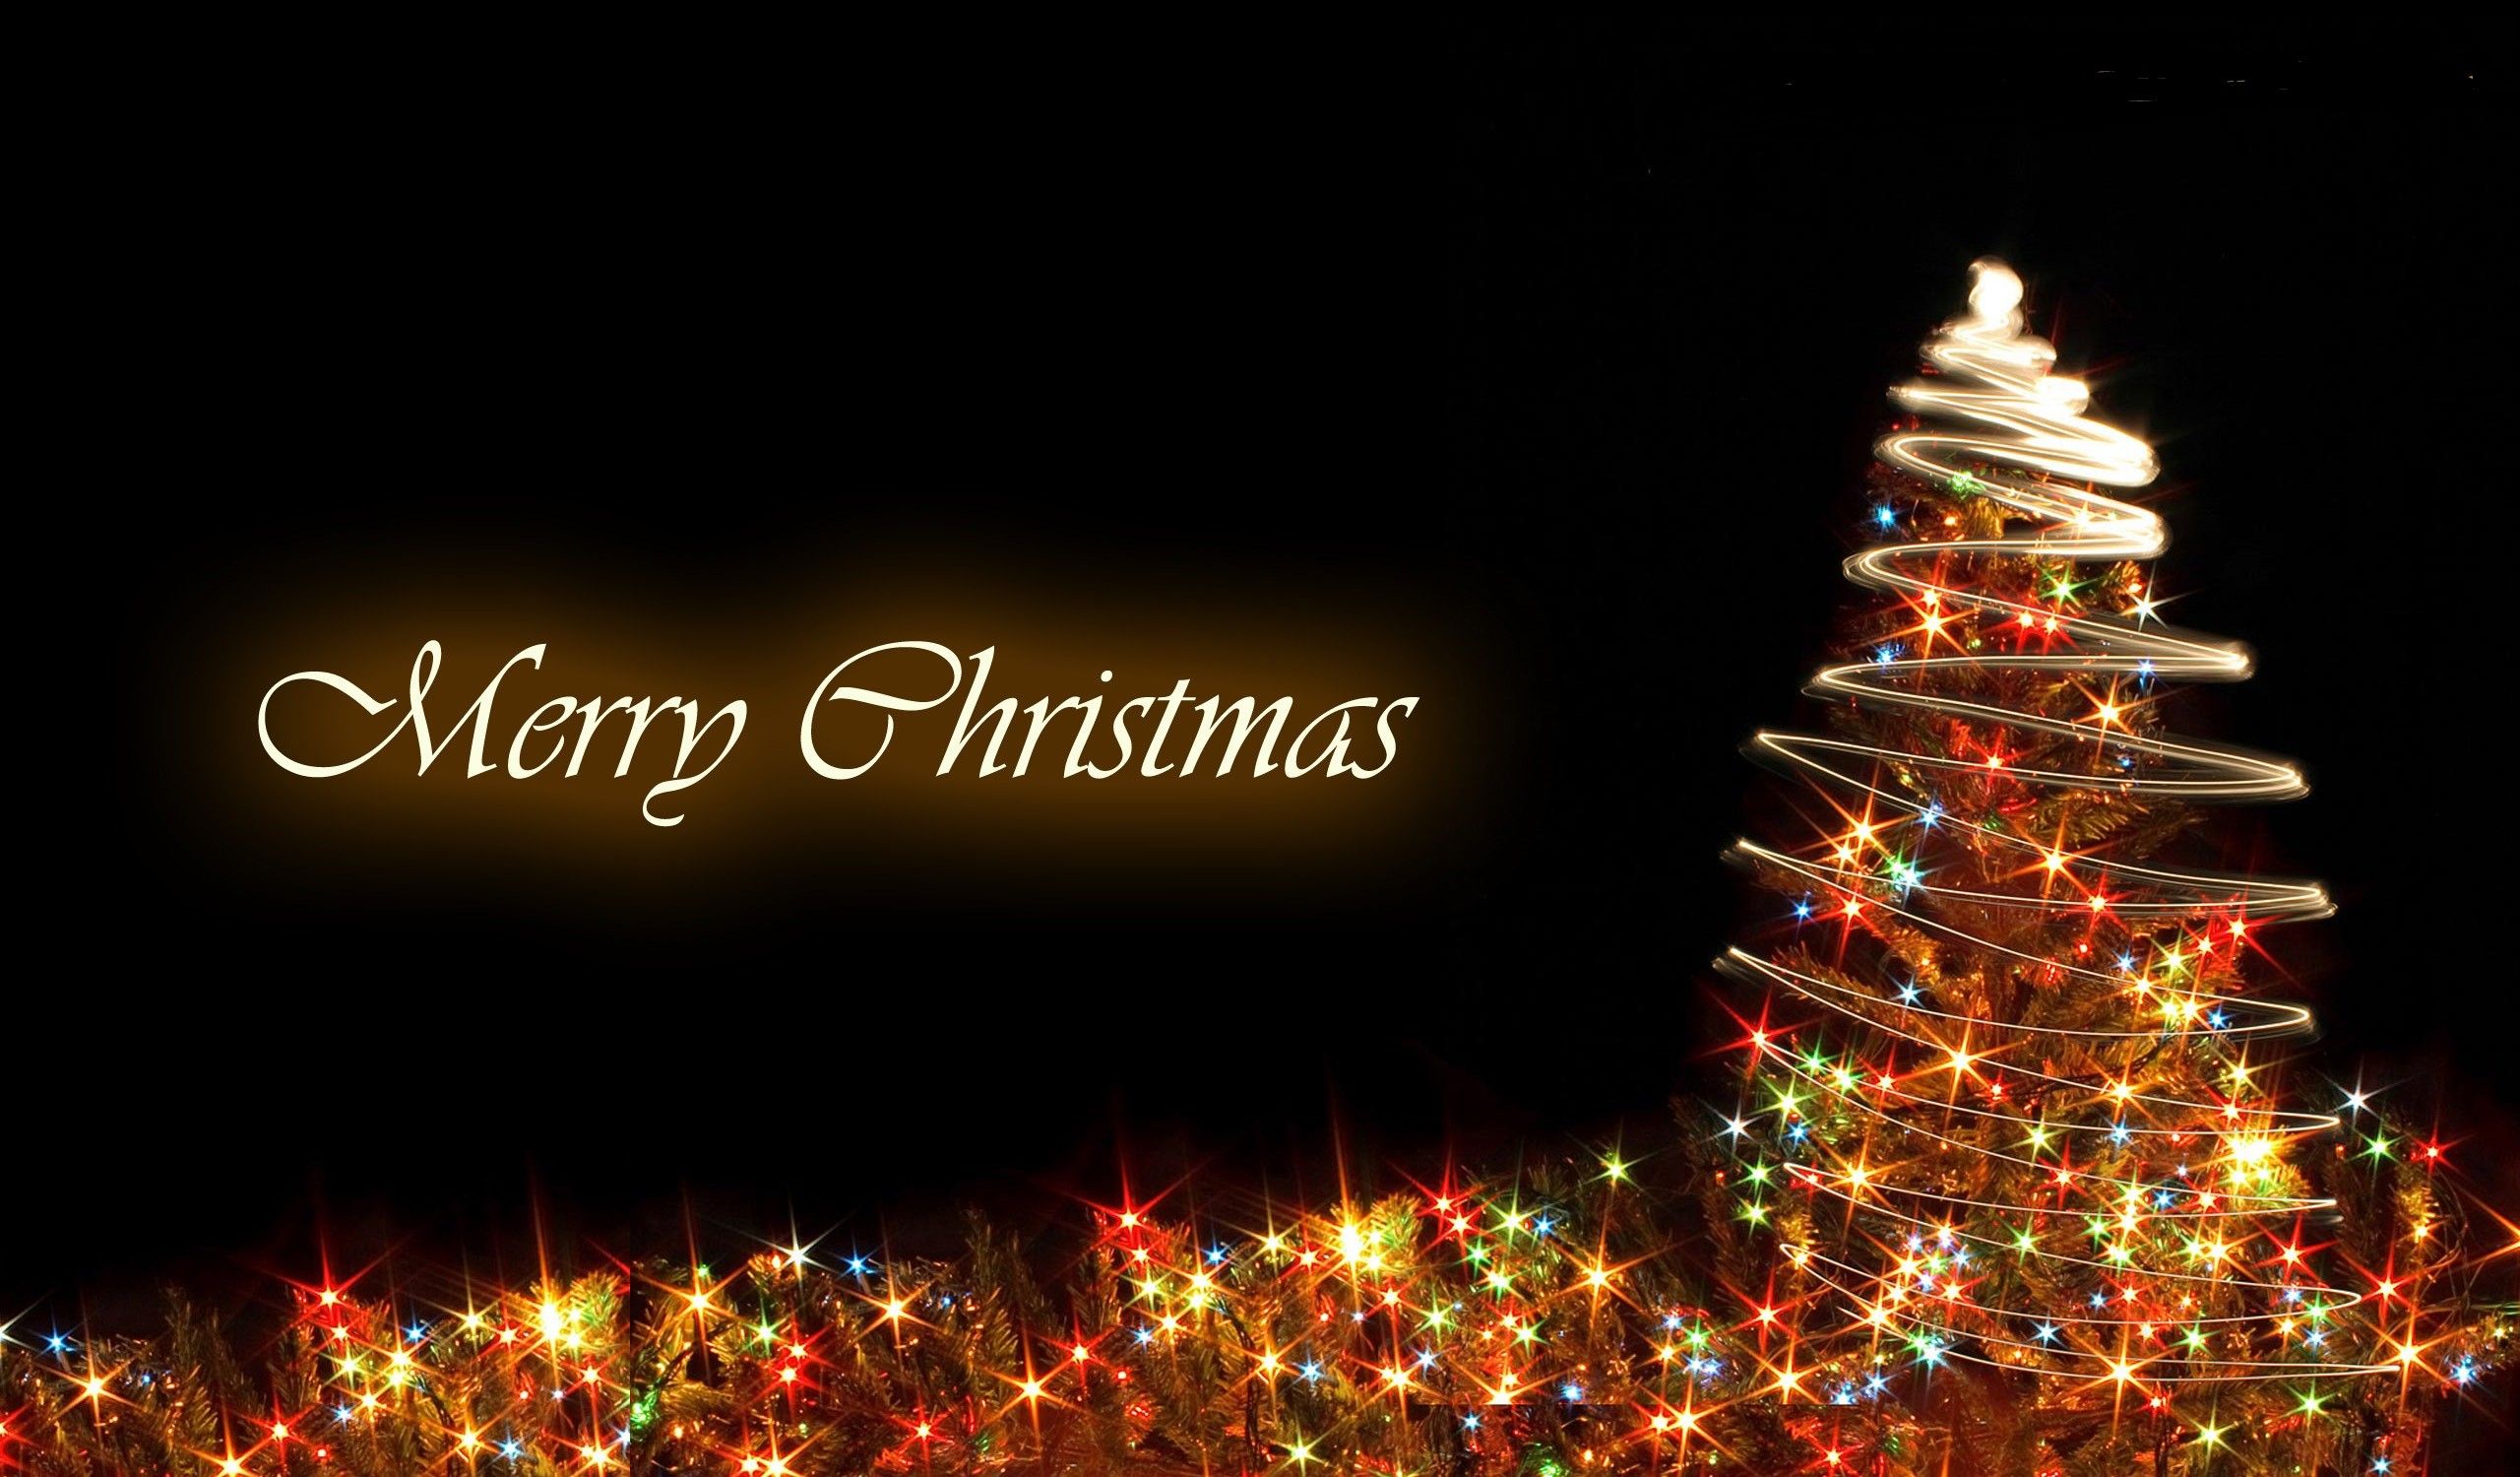 Merry Christmas HD Beautiful Image. Best Inspirational Picture Quotes & Motivational Image